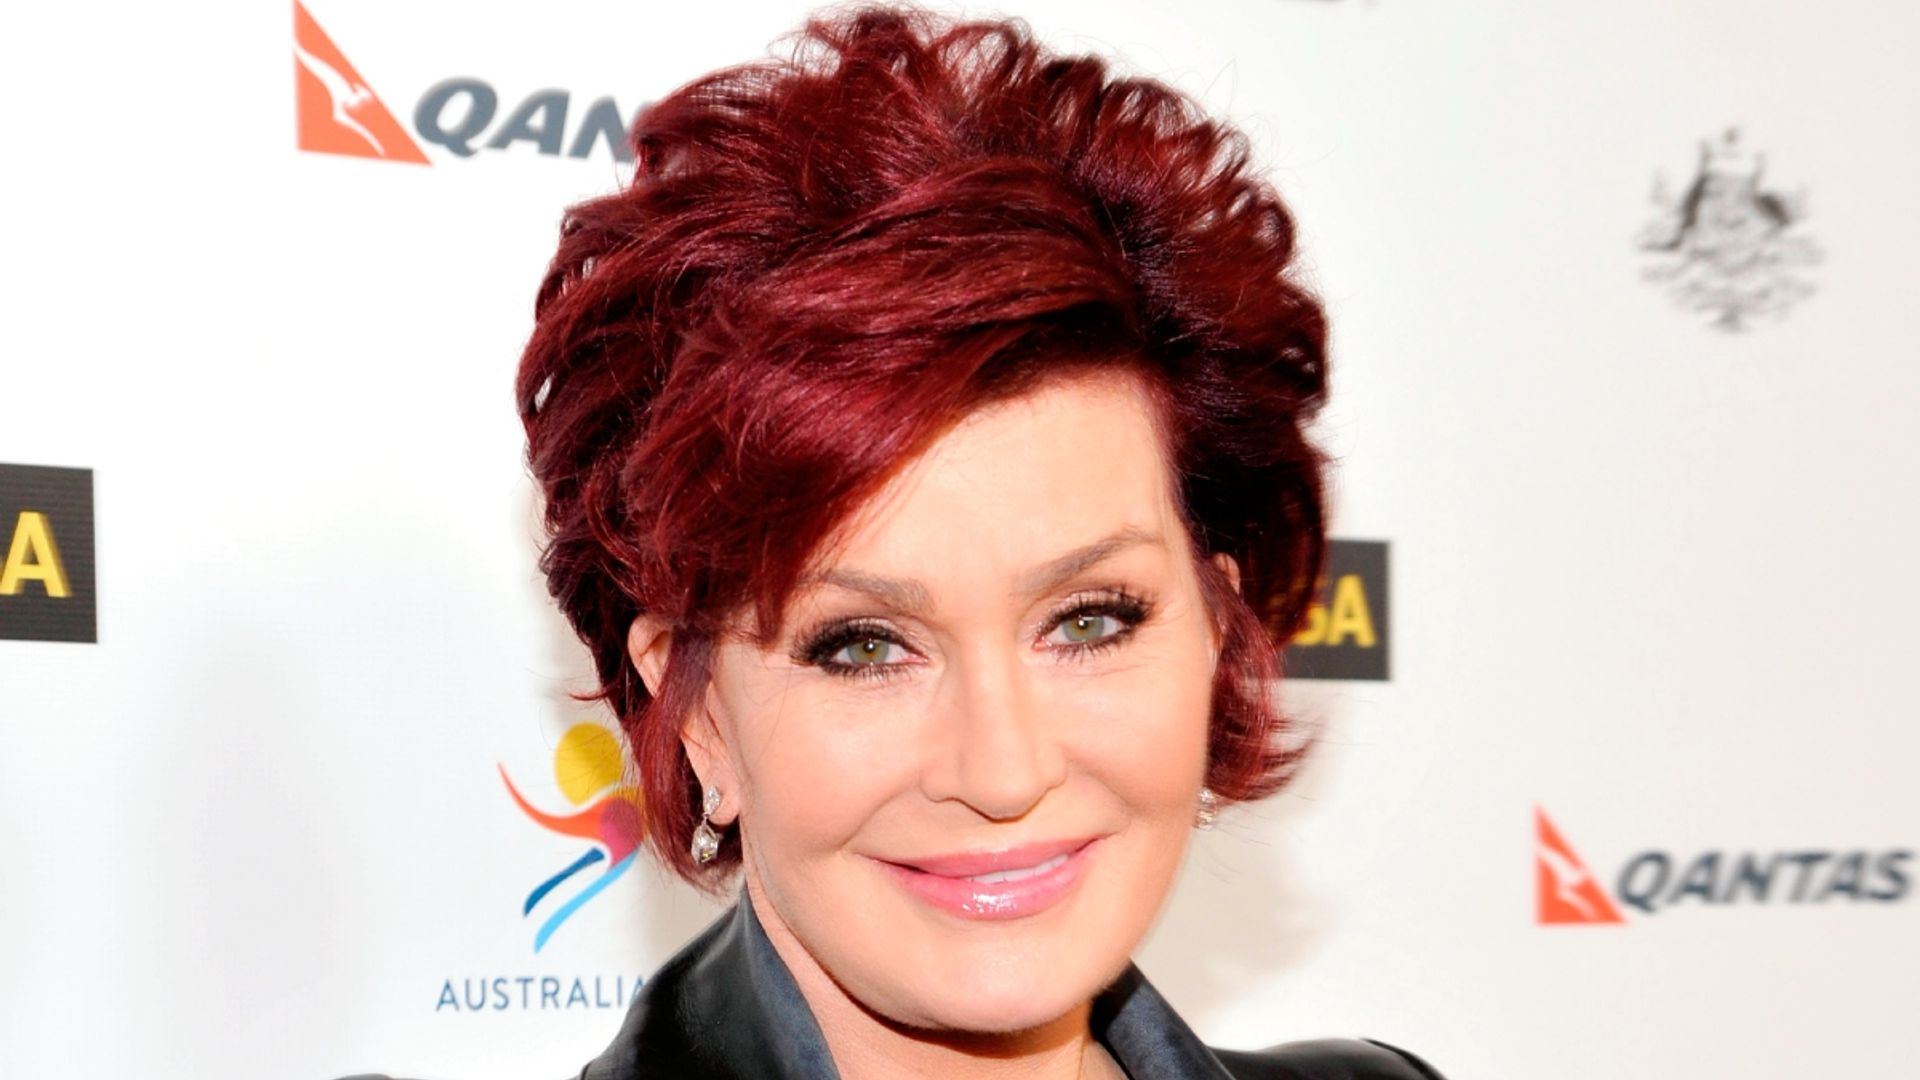 Sharon Osbourne hints at 'lively debates' as she announces exciting career change